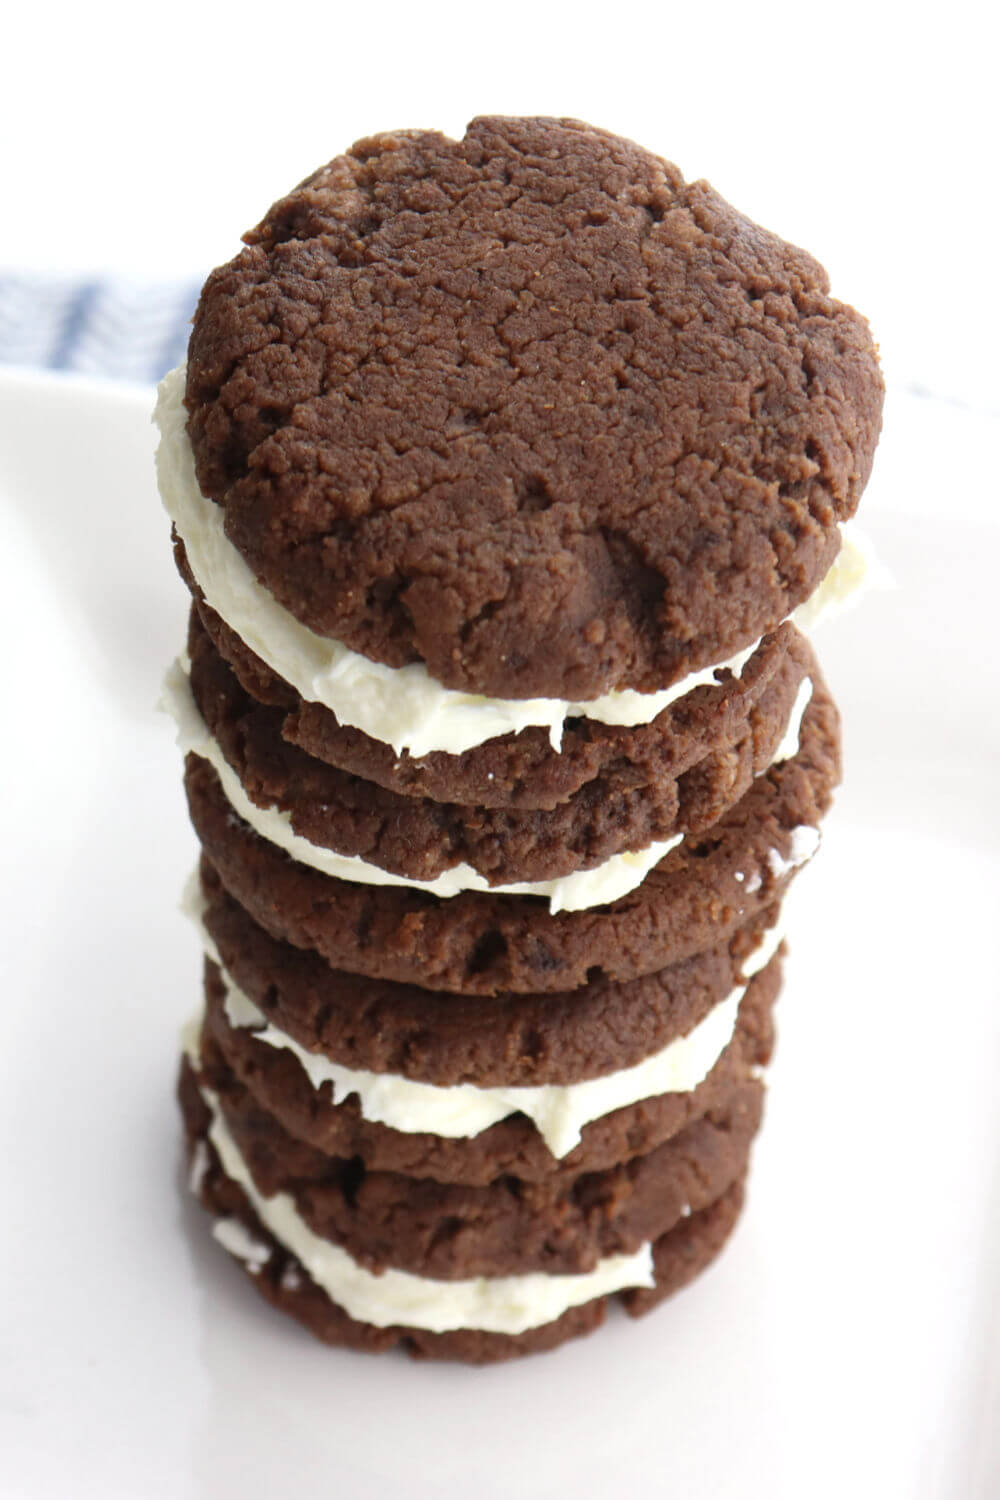 Low carb keto chocolate sandwich cookies are a delicious gluten-free sweet treat. Curb those cravings and enjoy a sugar-free keto way of eating. #lowcarbdesserts #ketorecipes